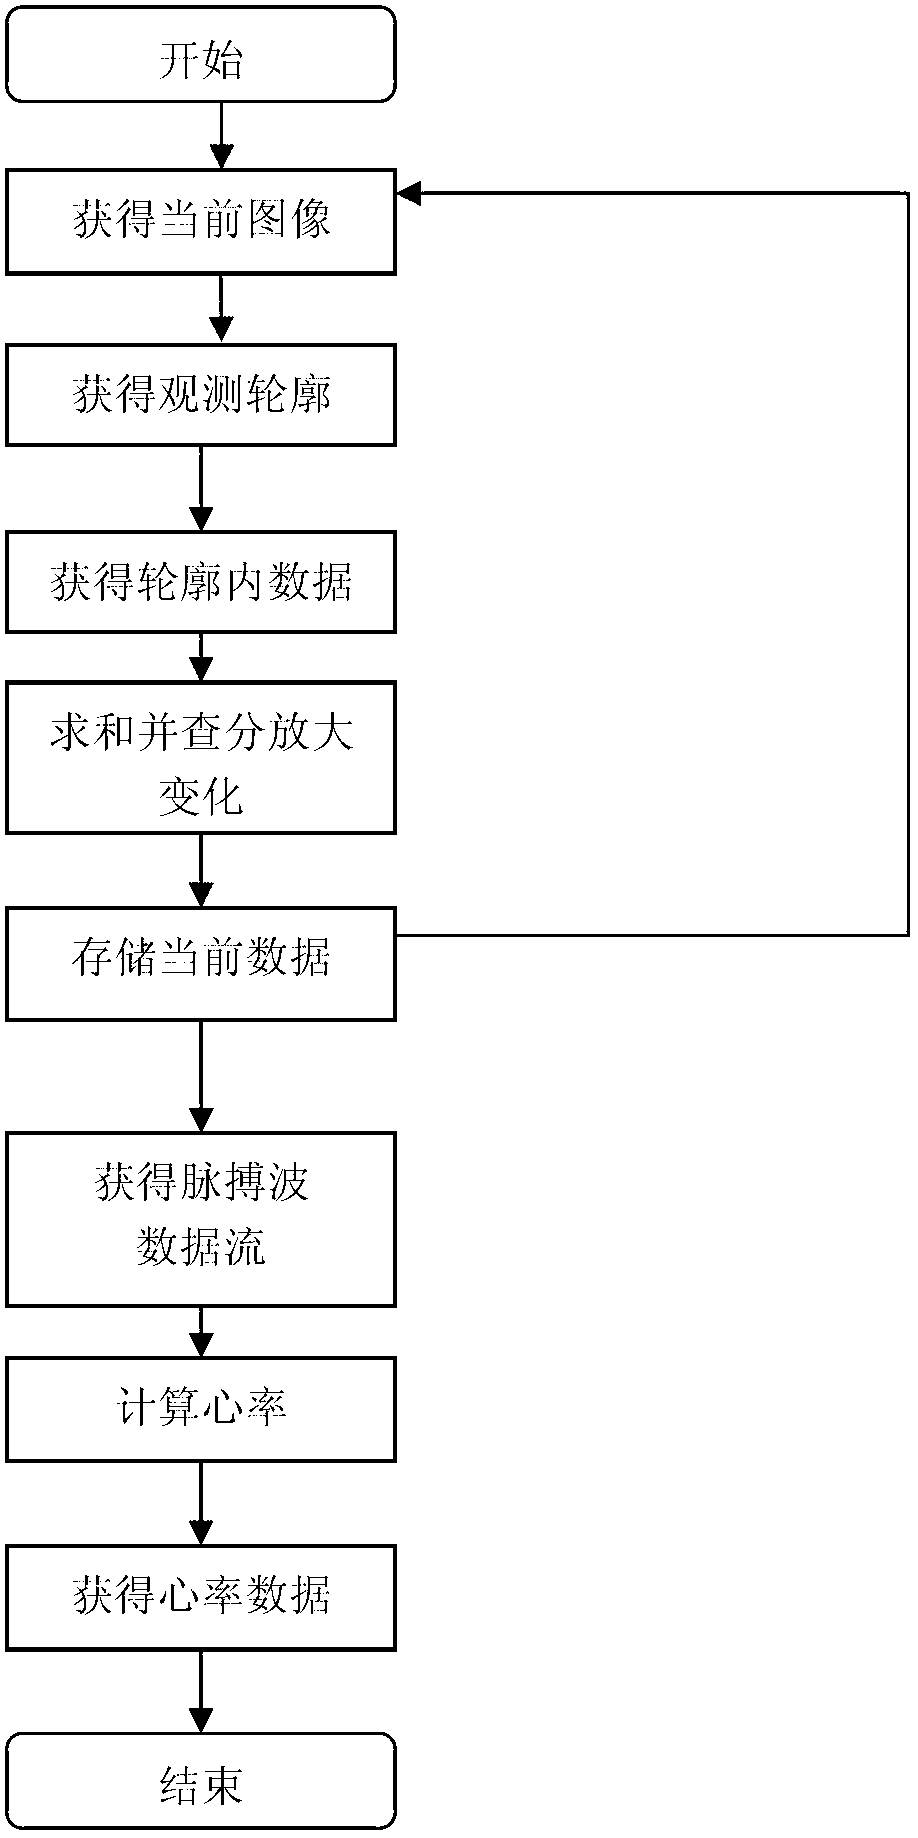 Non-contact vital sign data monitoring system and non-contact vital sign data monitoring method on basis of image processing